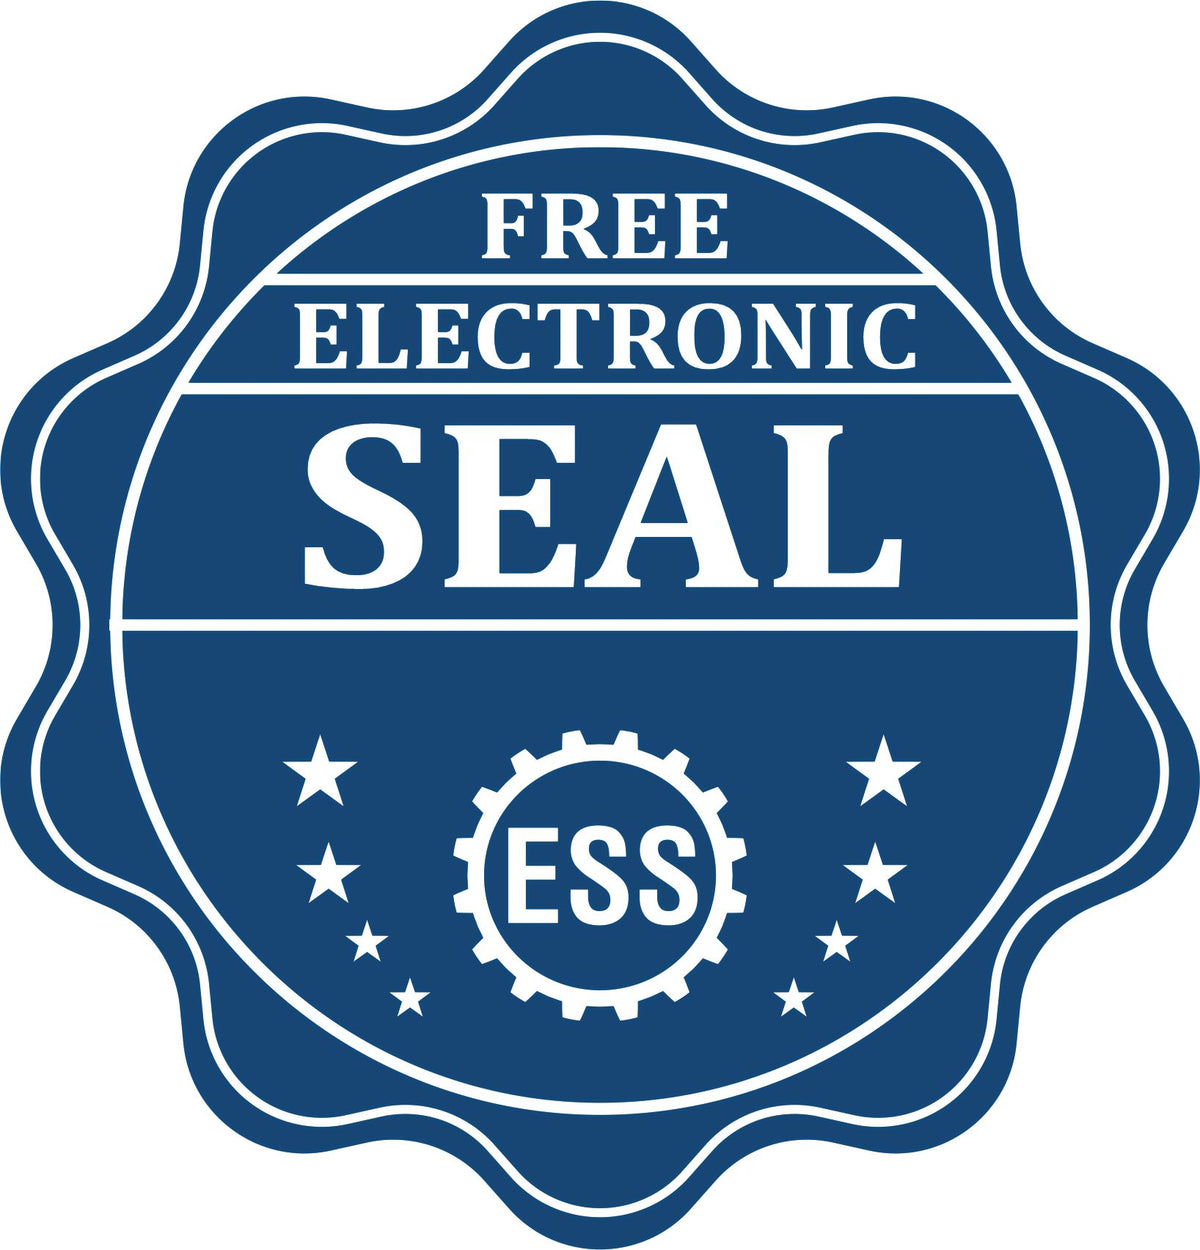 A badge showing a free electronic seal for the Gift Minnesota Land Surveyor Seal with stars and the ESS gear on the emblem.